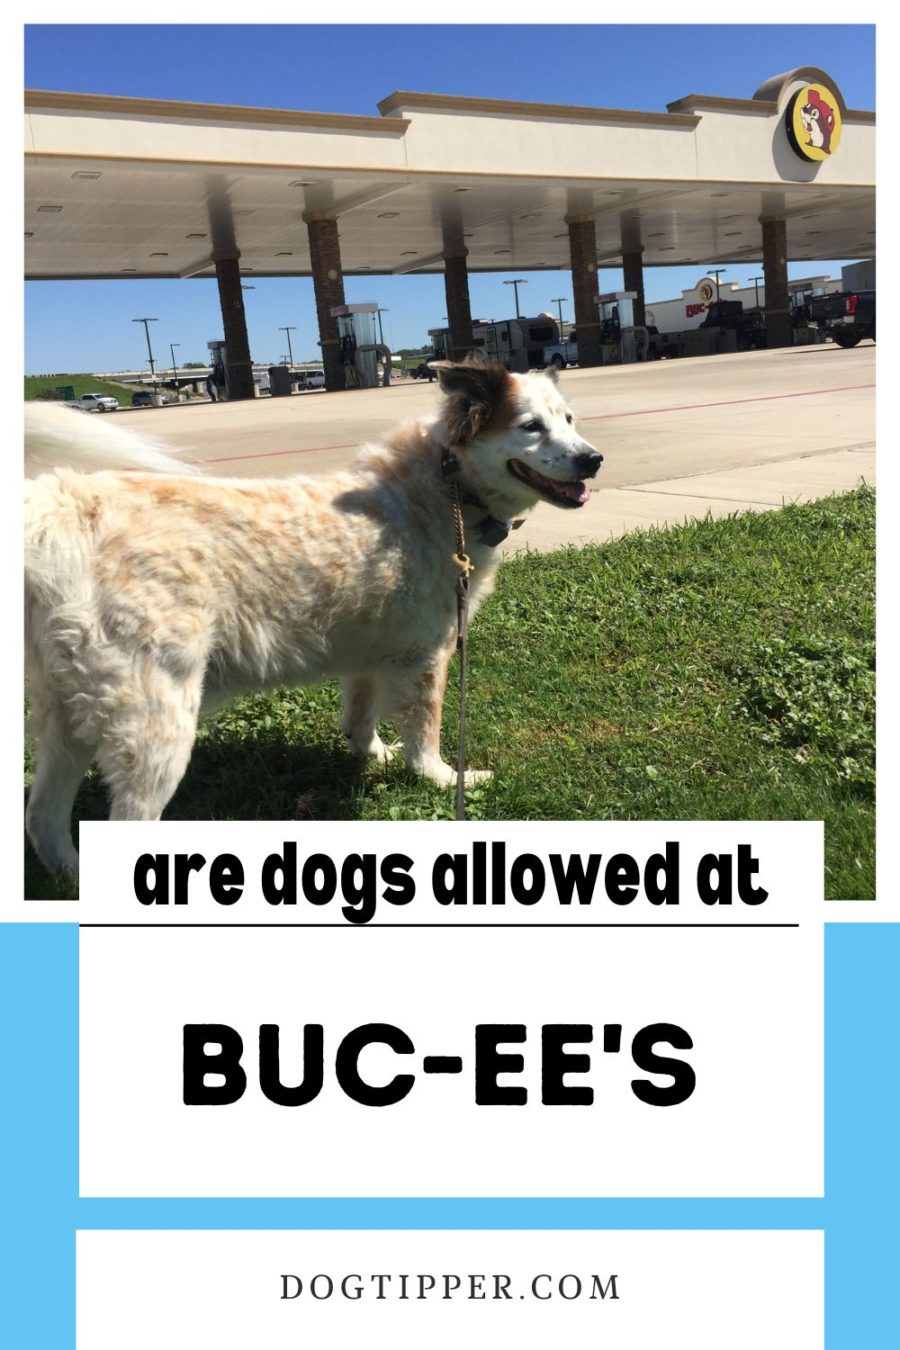 Can I Bring My Dog to Buc-ee's?